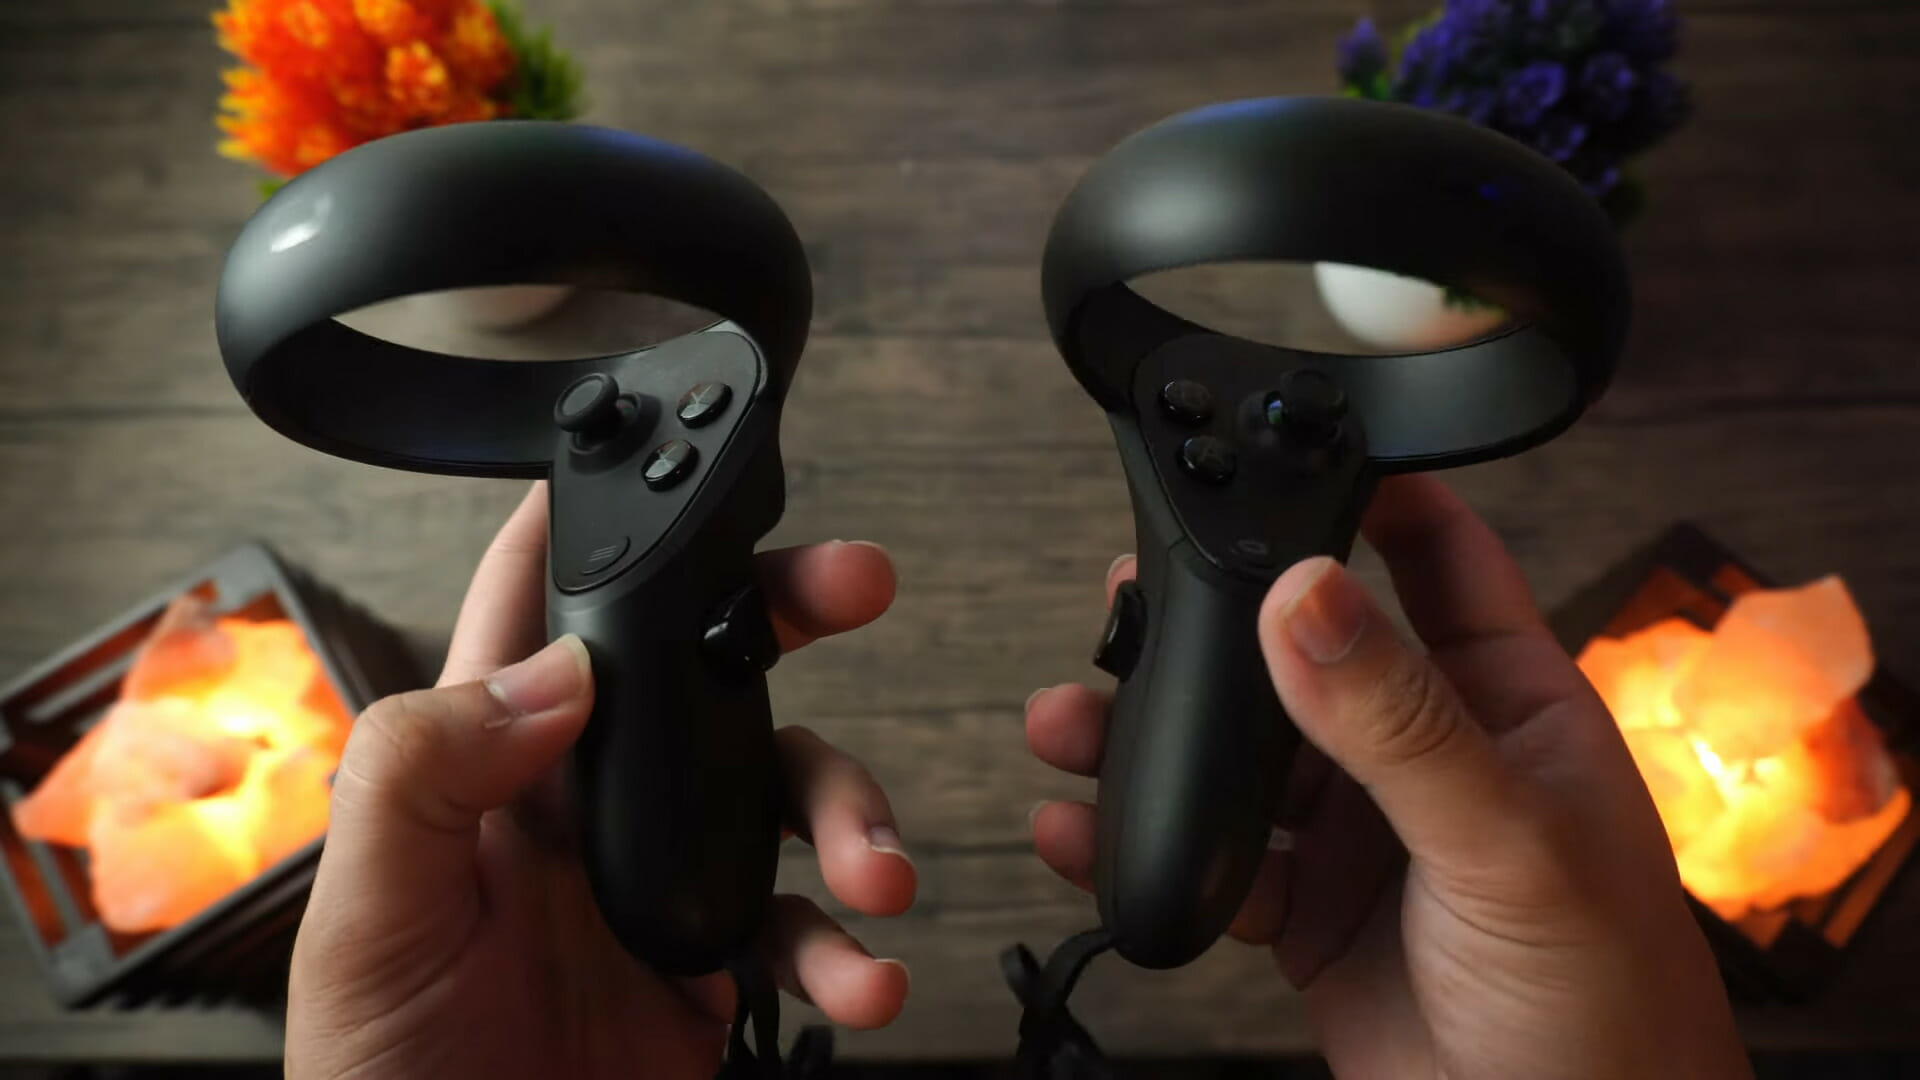 Best Battery Replacement for Oculus Rift S Controllers in 2022